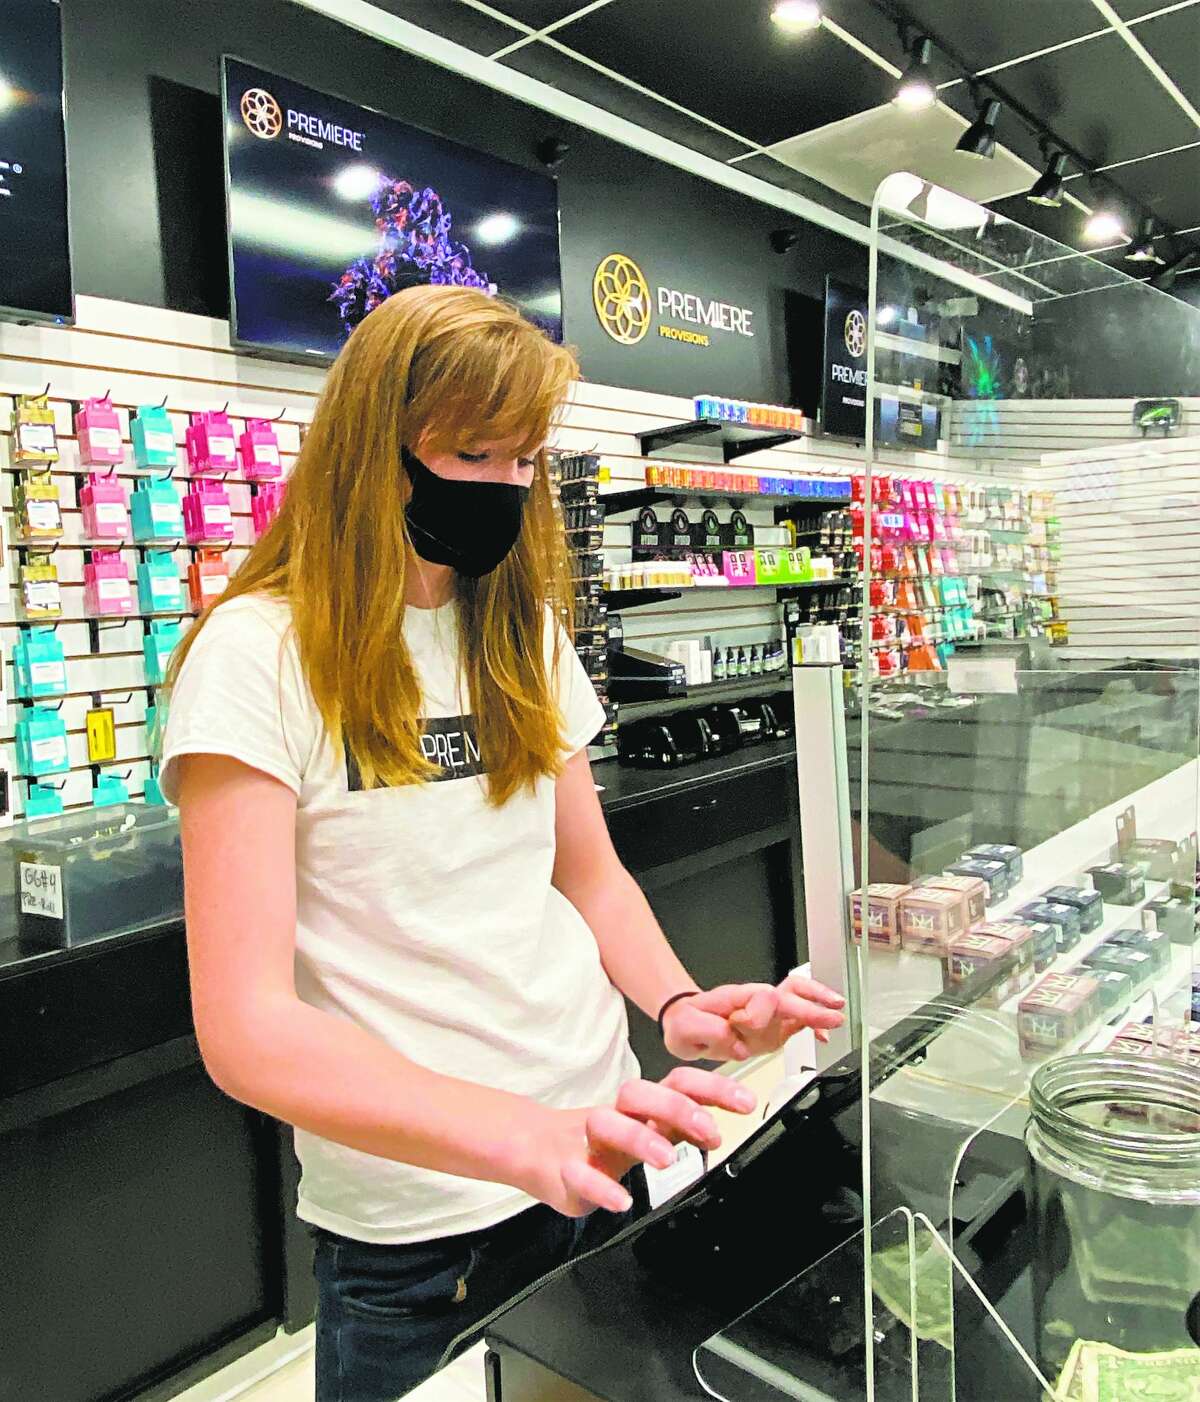 Premiere Provisions Budtender MacKenna Myers works at the register, while practicing social distancing and mask wearing due to the current coronavirus pandemic.